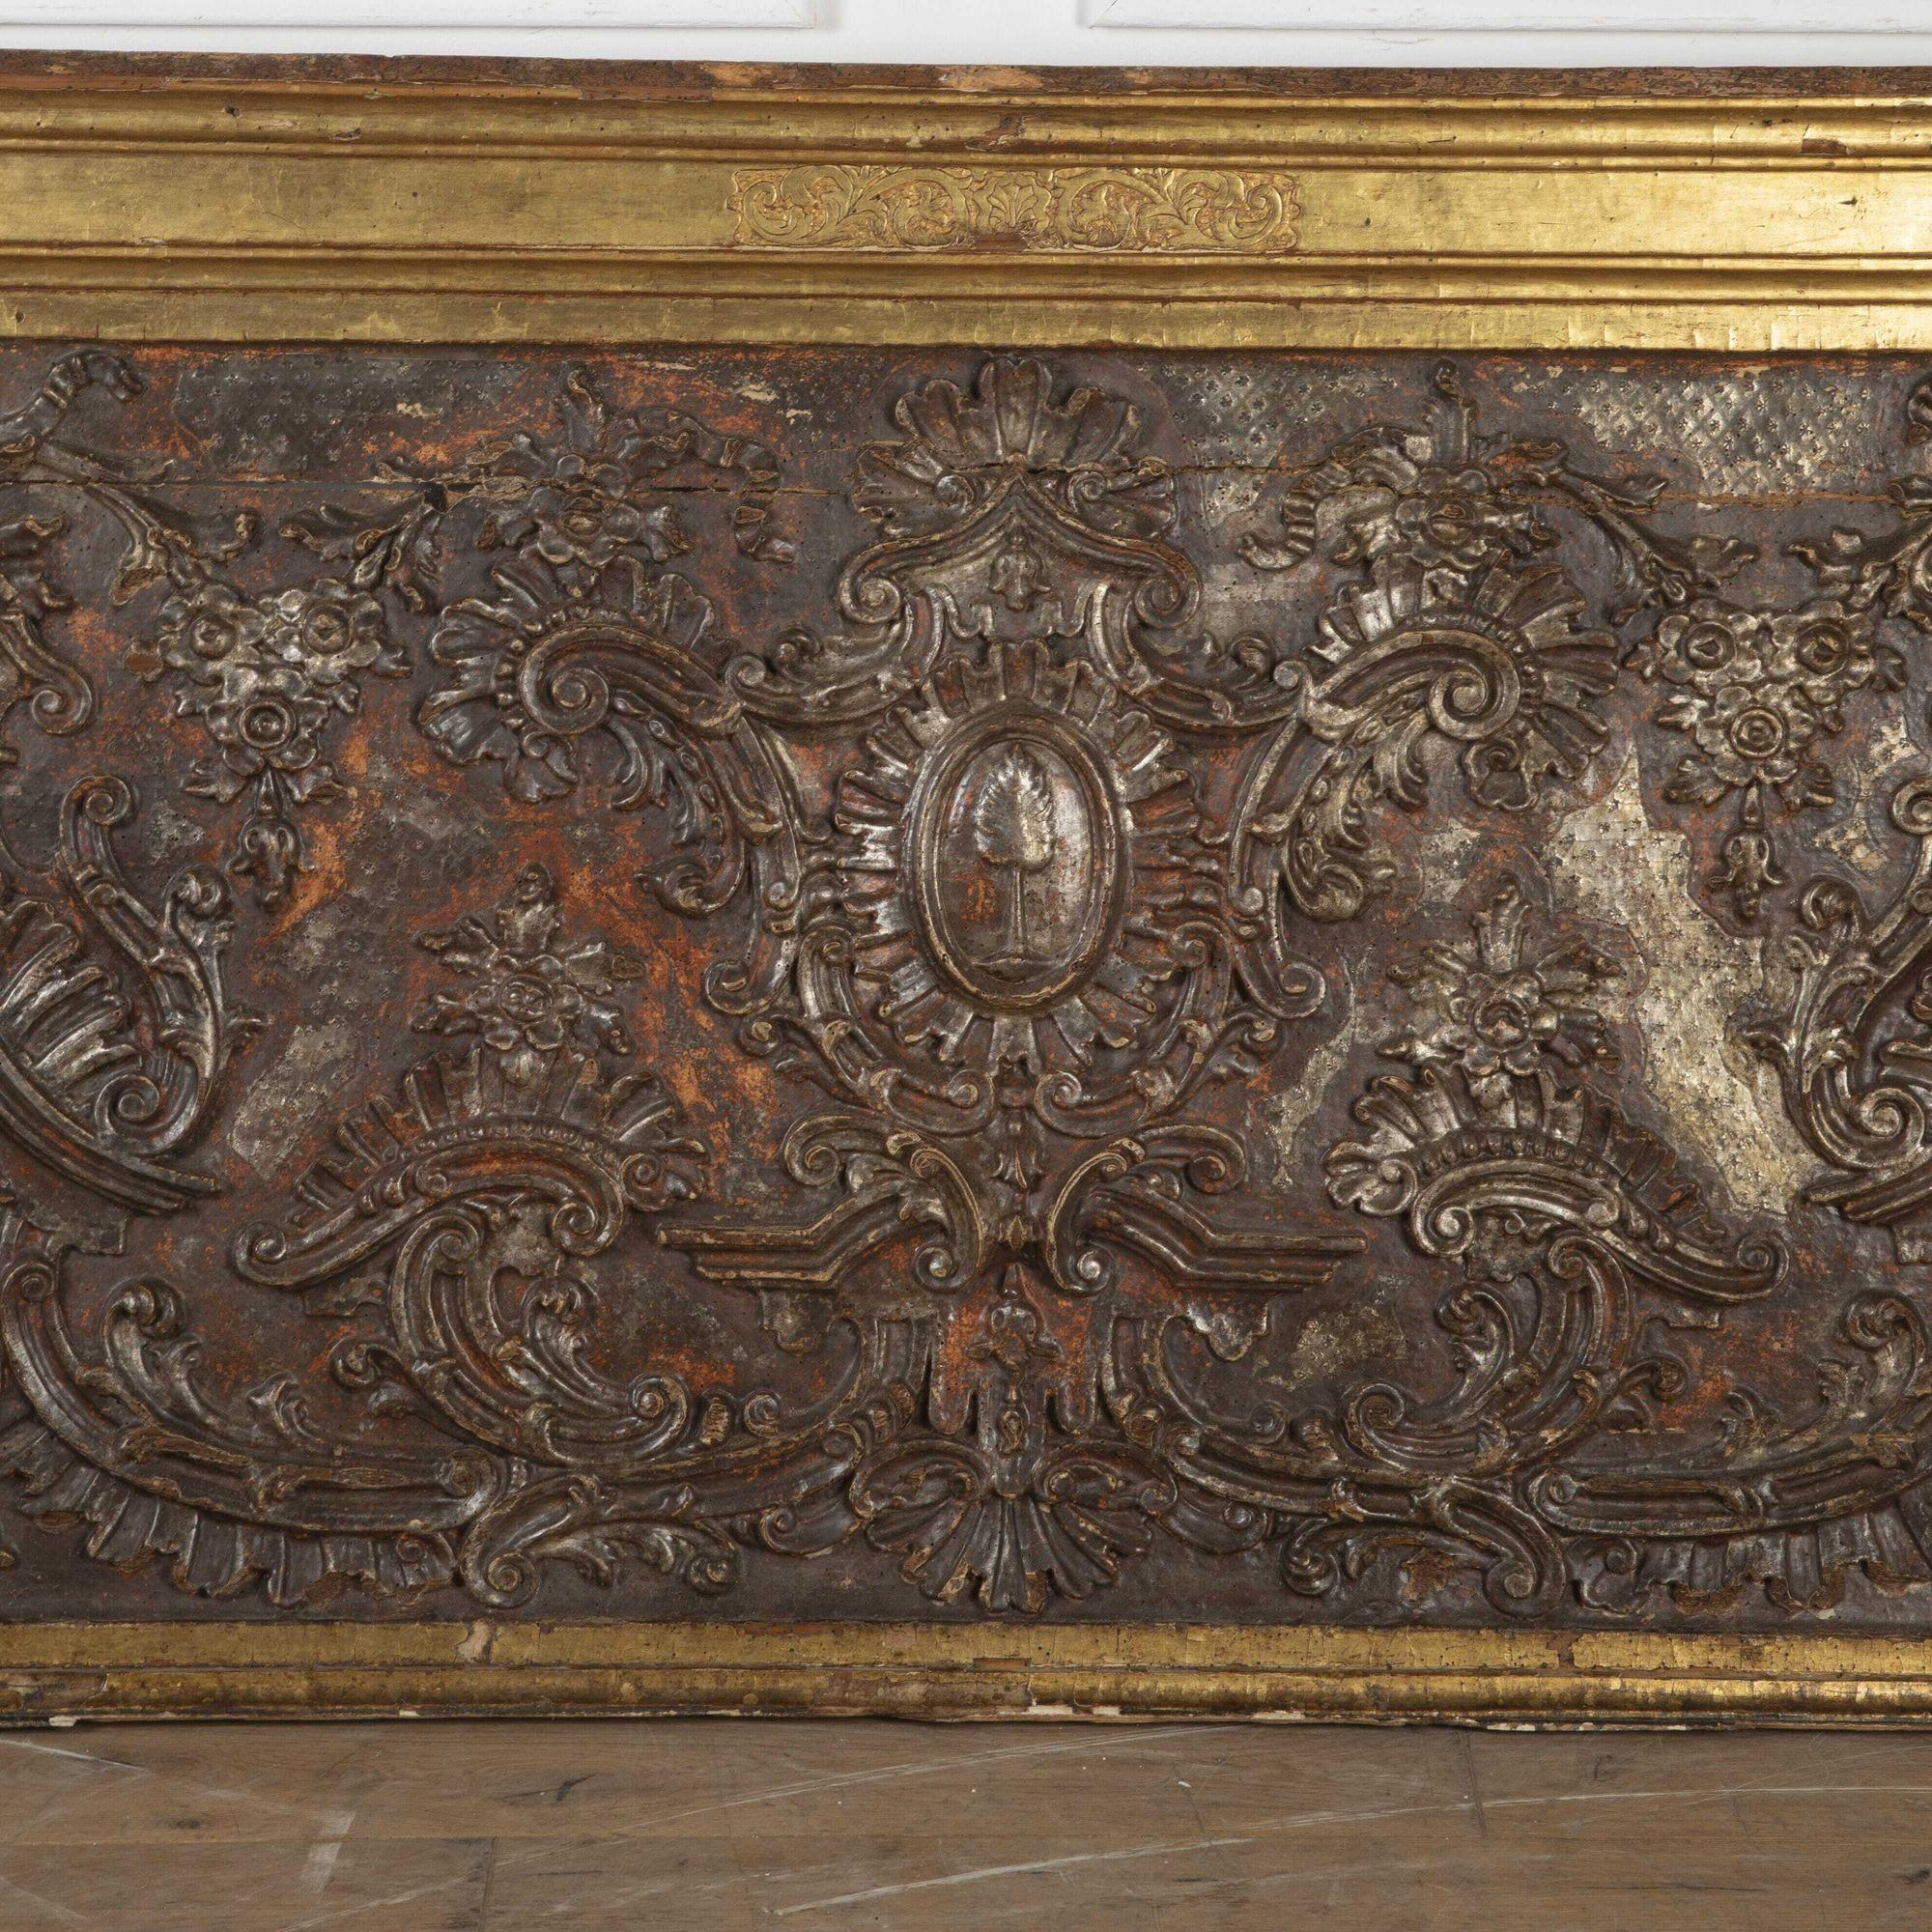 Wood 17th Century Carved Spanish Alter Panel